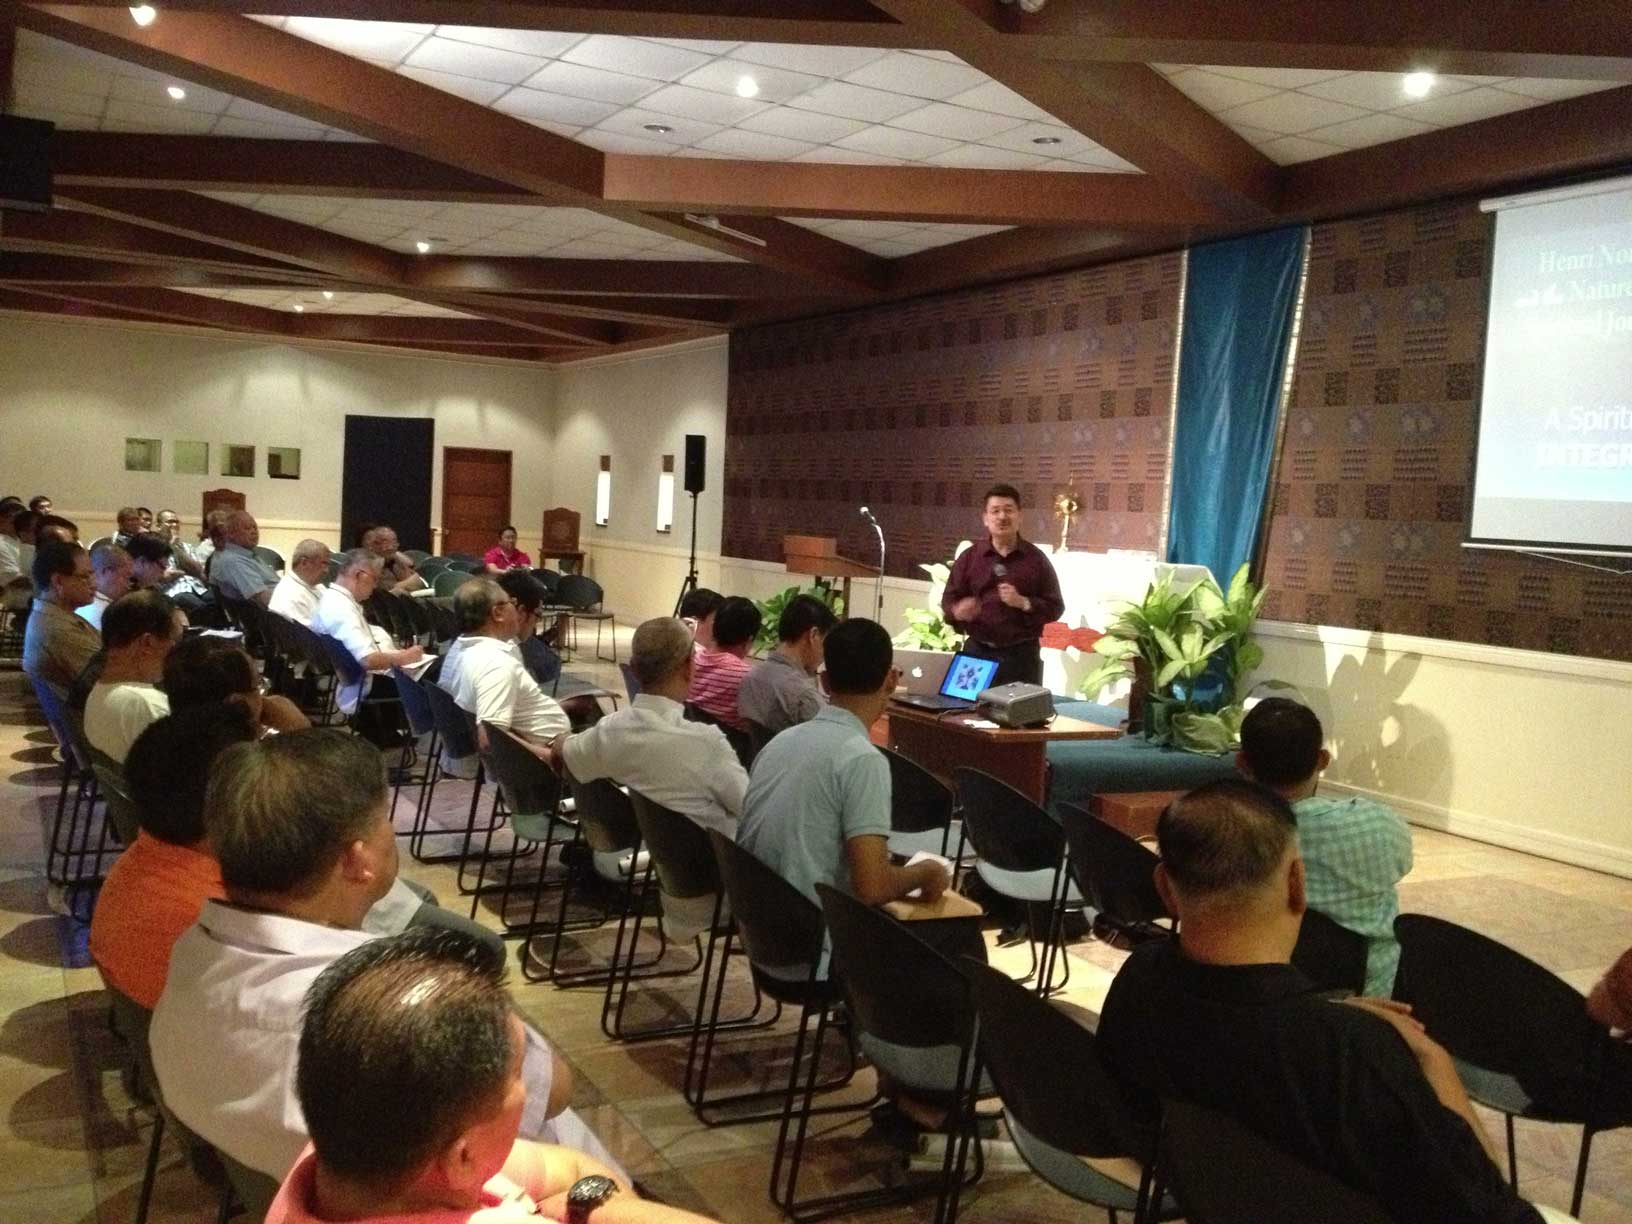 Clergy Day of Recollection Presentation on Nouwen (Archbishop's Palace, Jaro, Iloilo) - Feb. 3